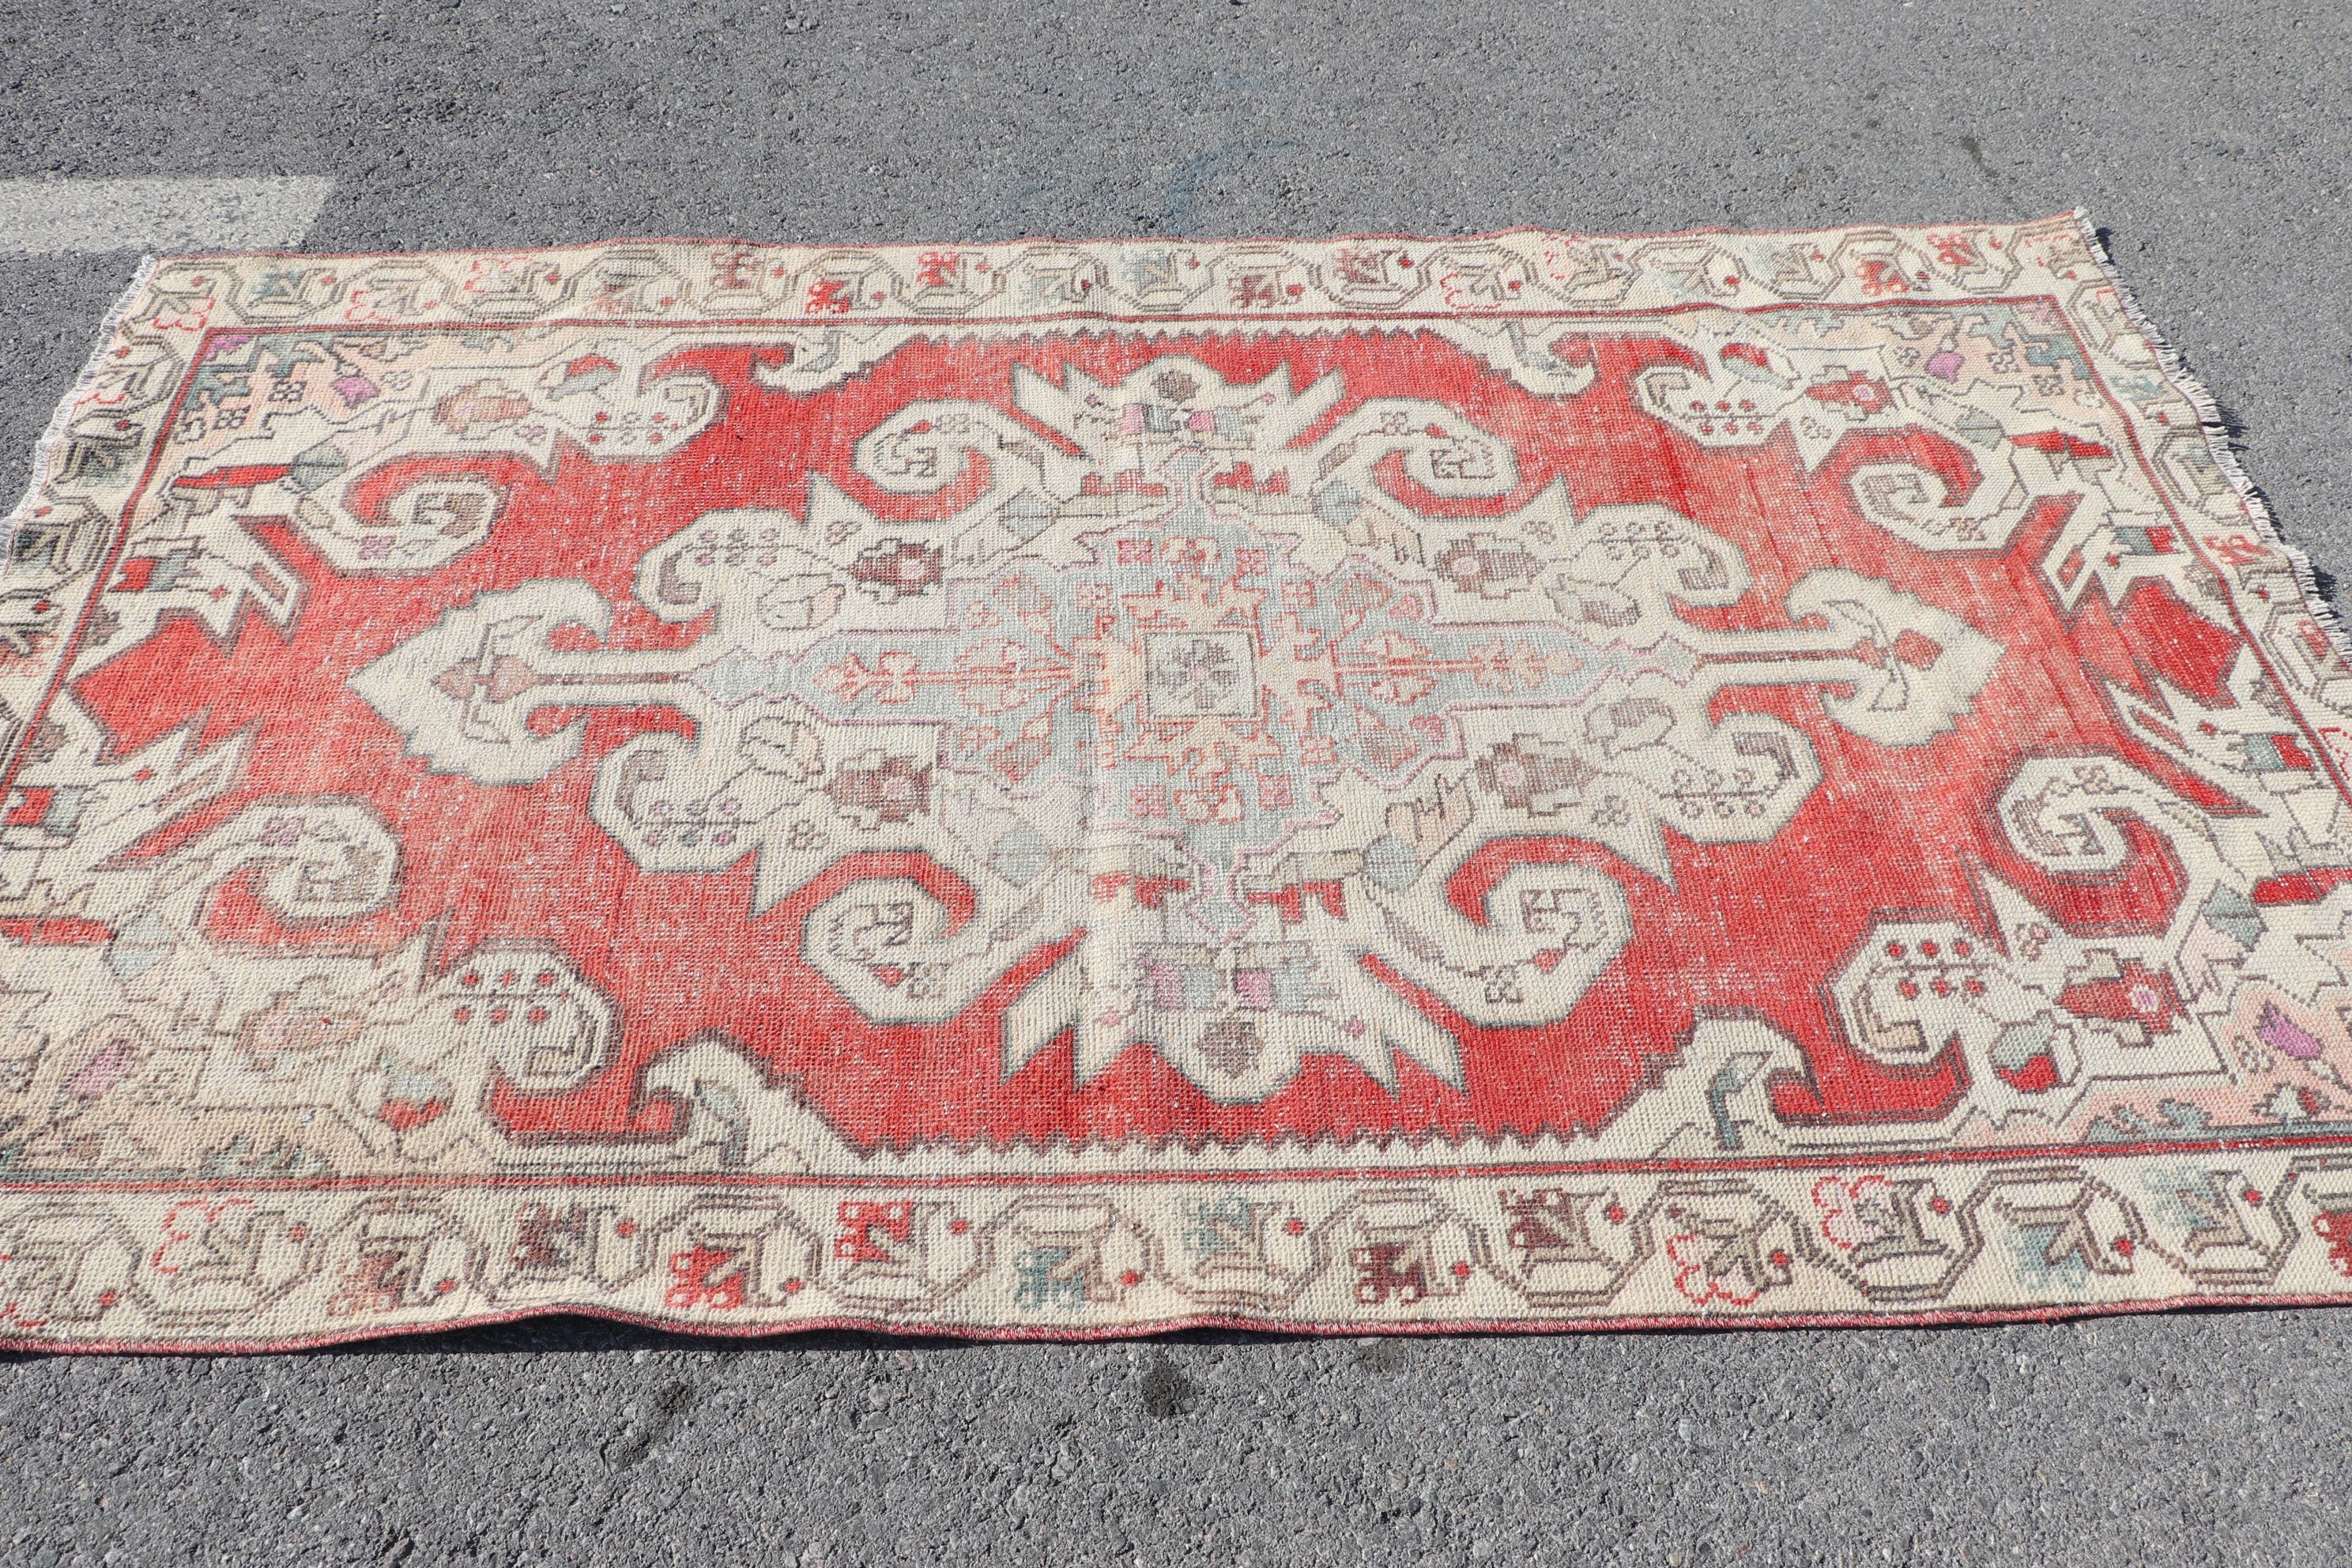 Kitchen Rugs, Dining Room Rug, 4.3x7.2 ft Area Rug, Red Cool Rugs, Bedroom Rugs, Vintage Rugs, Turkish Rug, Oushak Rugs, Rugs for Kitchen